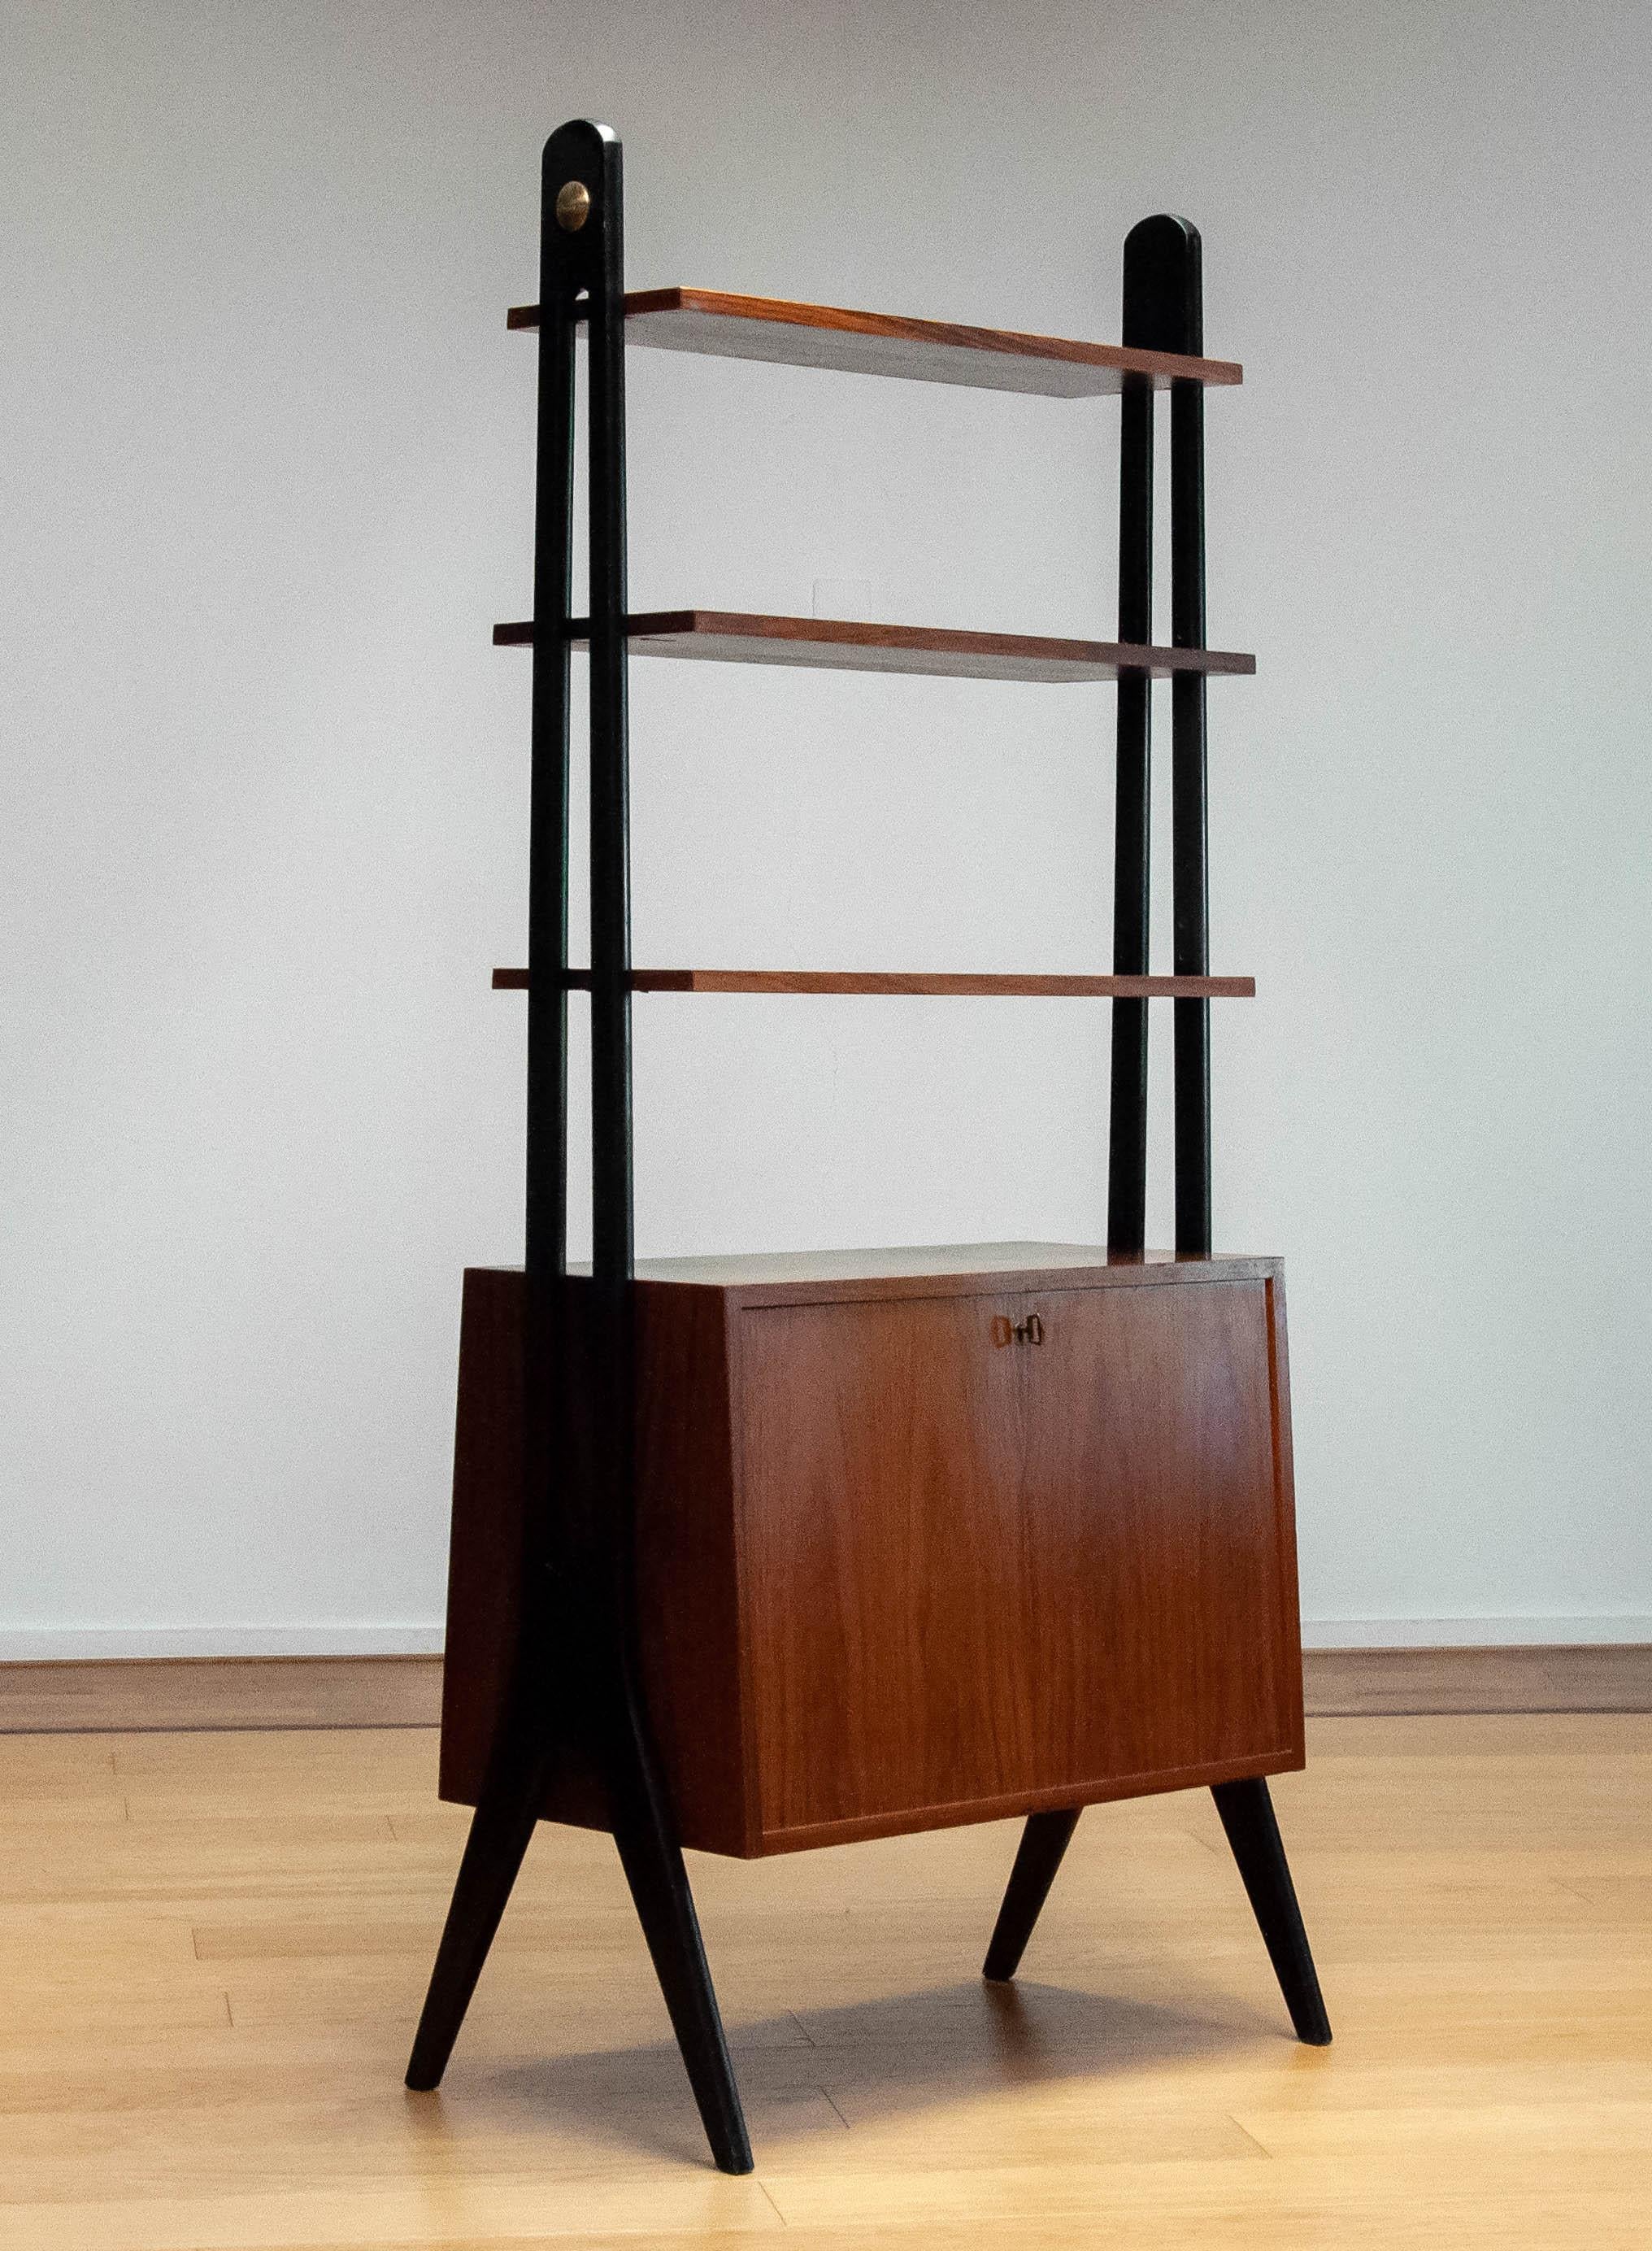 Absolutely beautiful and rare Scandinavian moderen bookcase which can be used as a room divider as well made by Treman in Sweden in the 1950s.
This cabinet is made of Rosewood / Rio Palissander combined with black lacquered stands made of beech. The